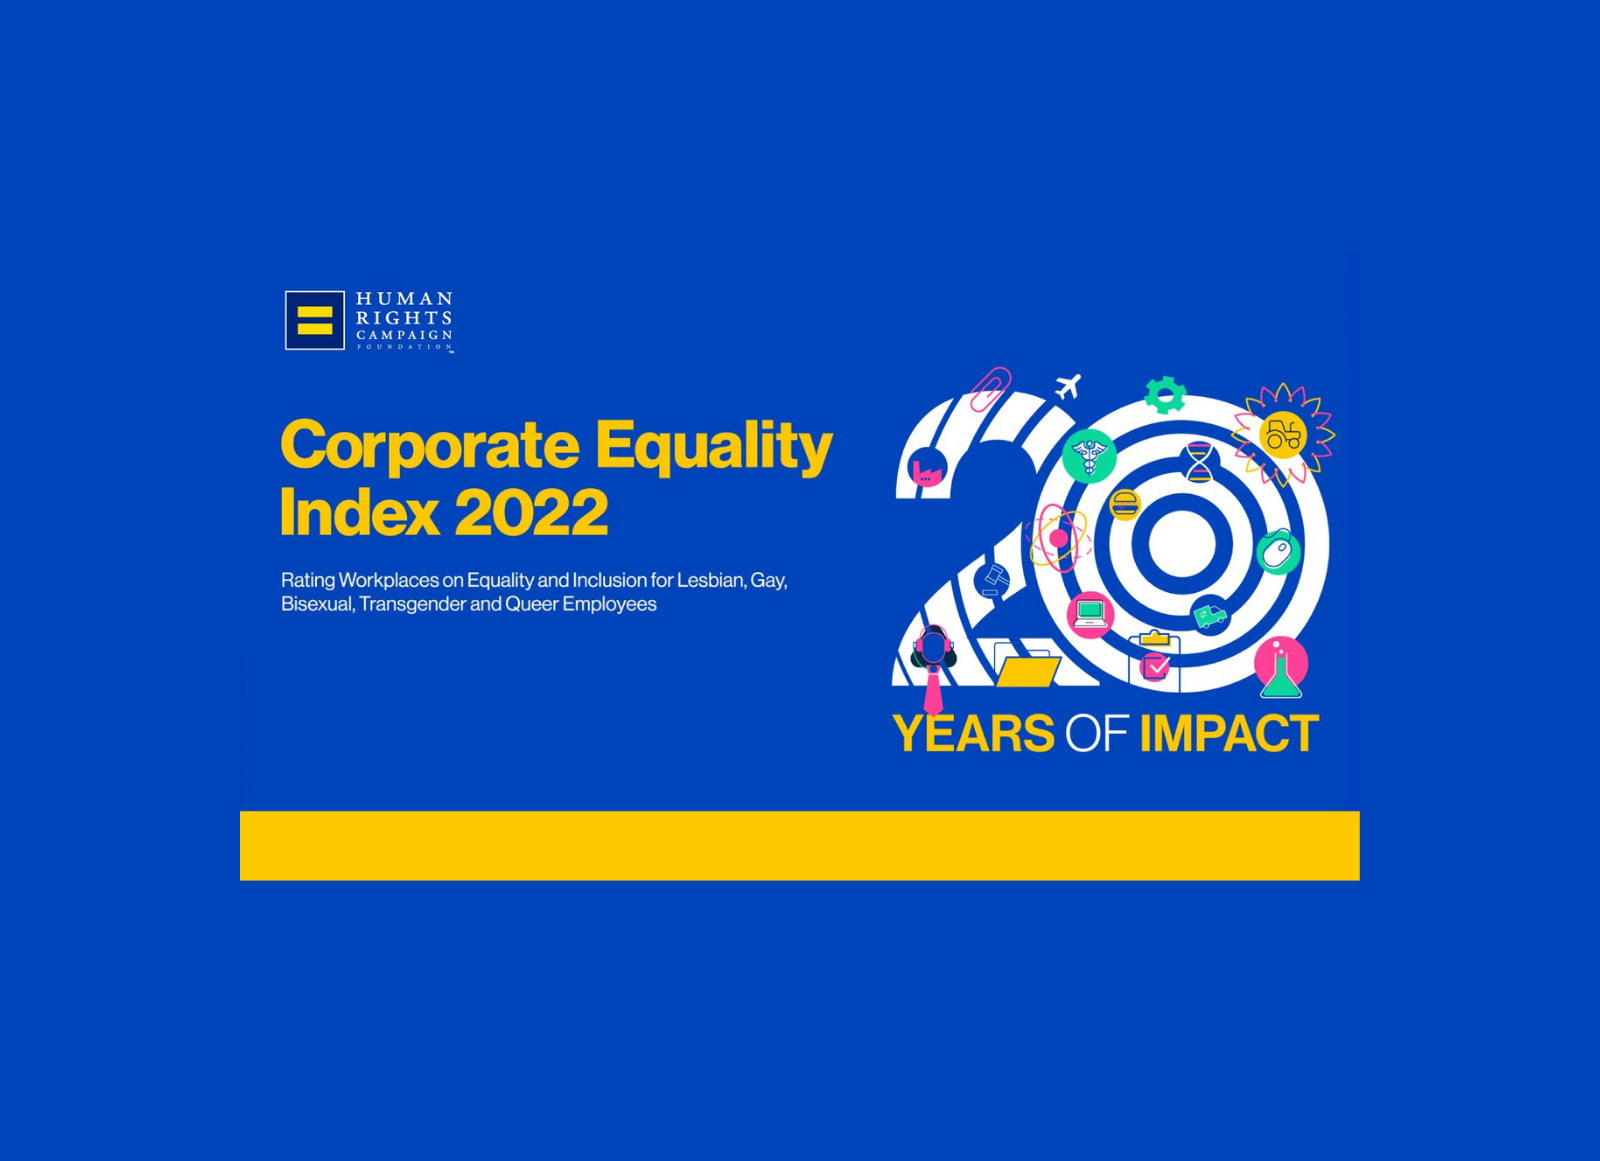 Corporate Equality Index 2022 